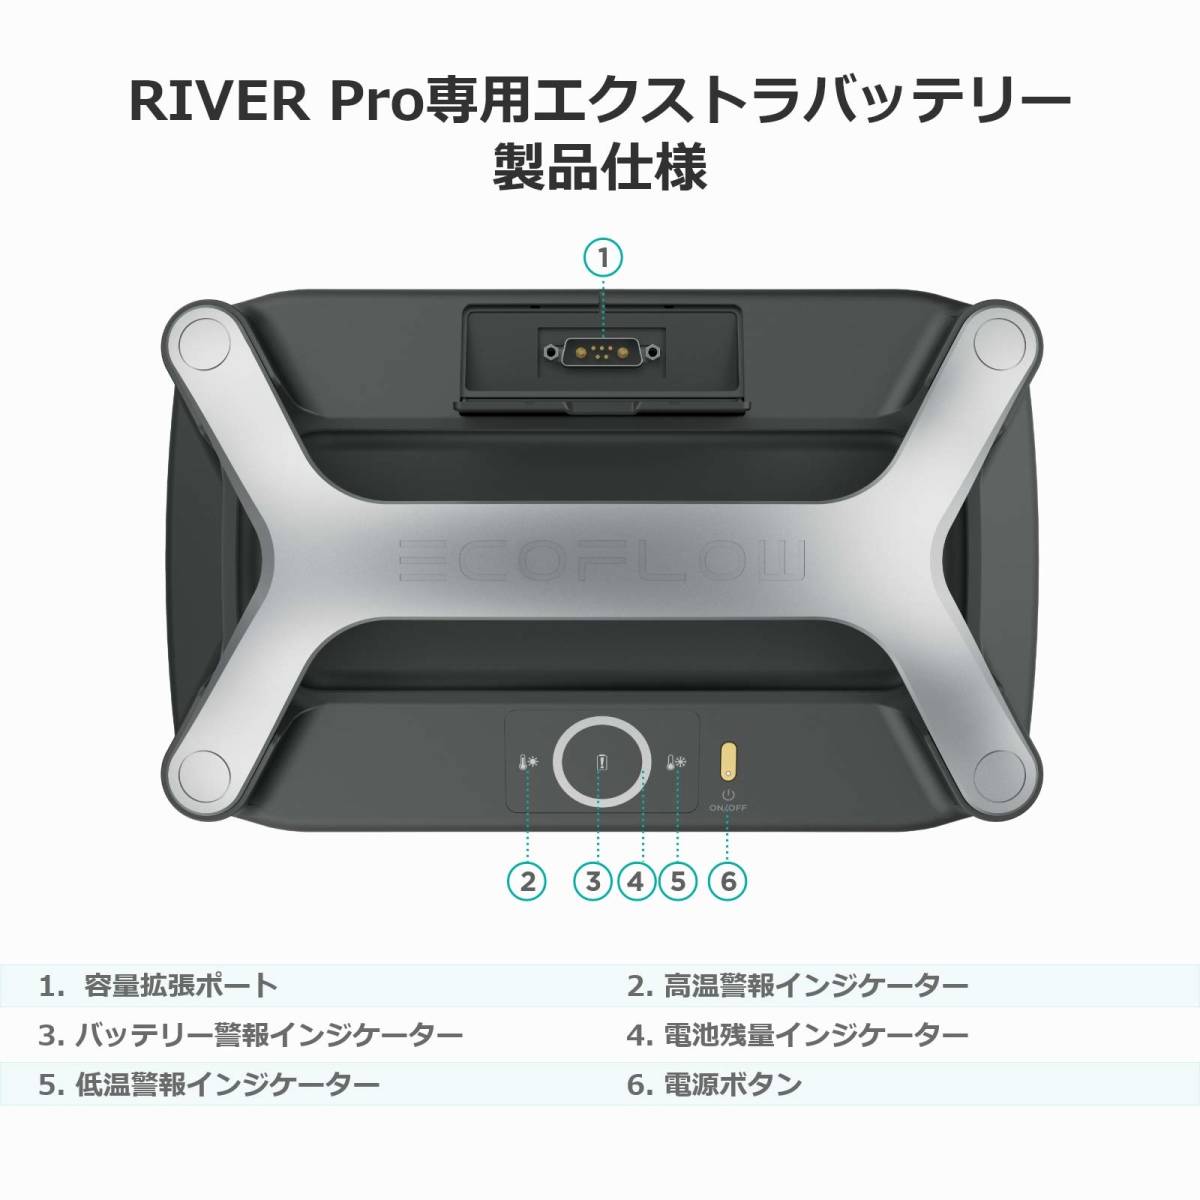 EcoFlow ポータブル電源 RIVER Pro専用容量拡張バッテリー 720Wh 付け替え簡単 RIVER Proポータブル電源(720Wh)と接続容量を倍増(1440Wh)に_画像2